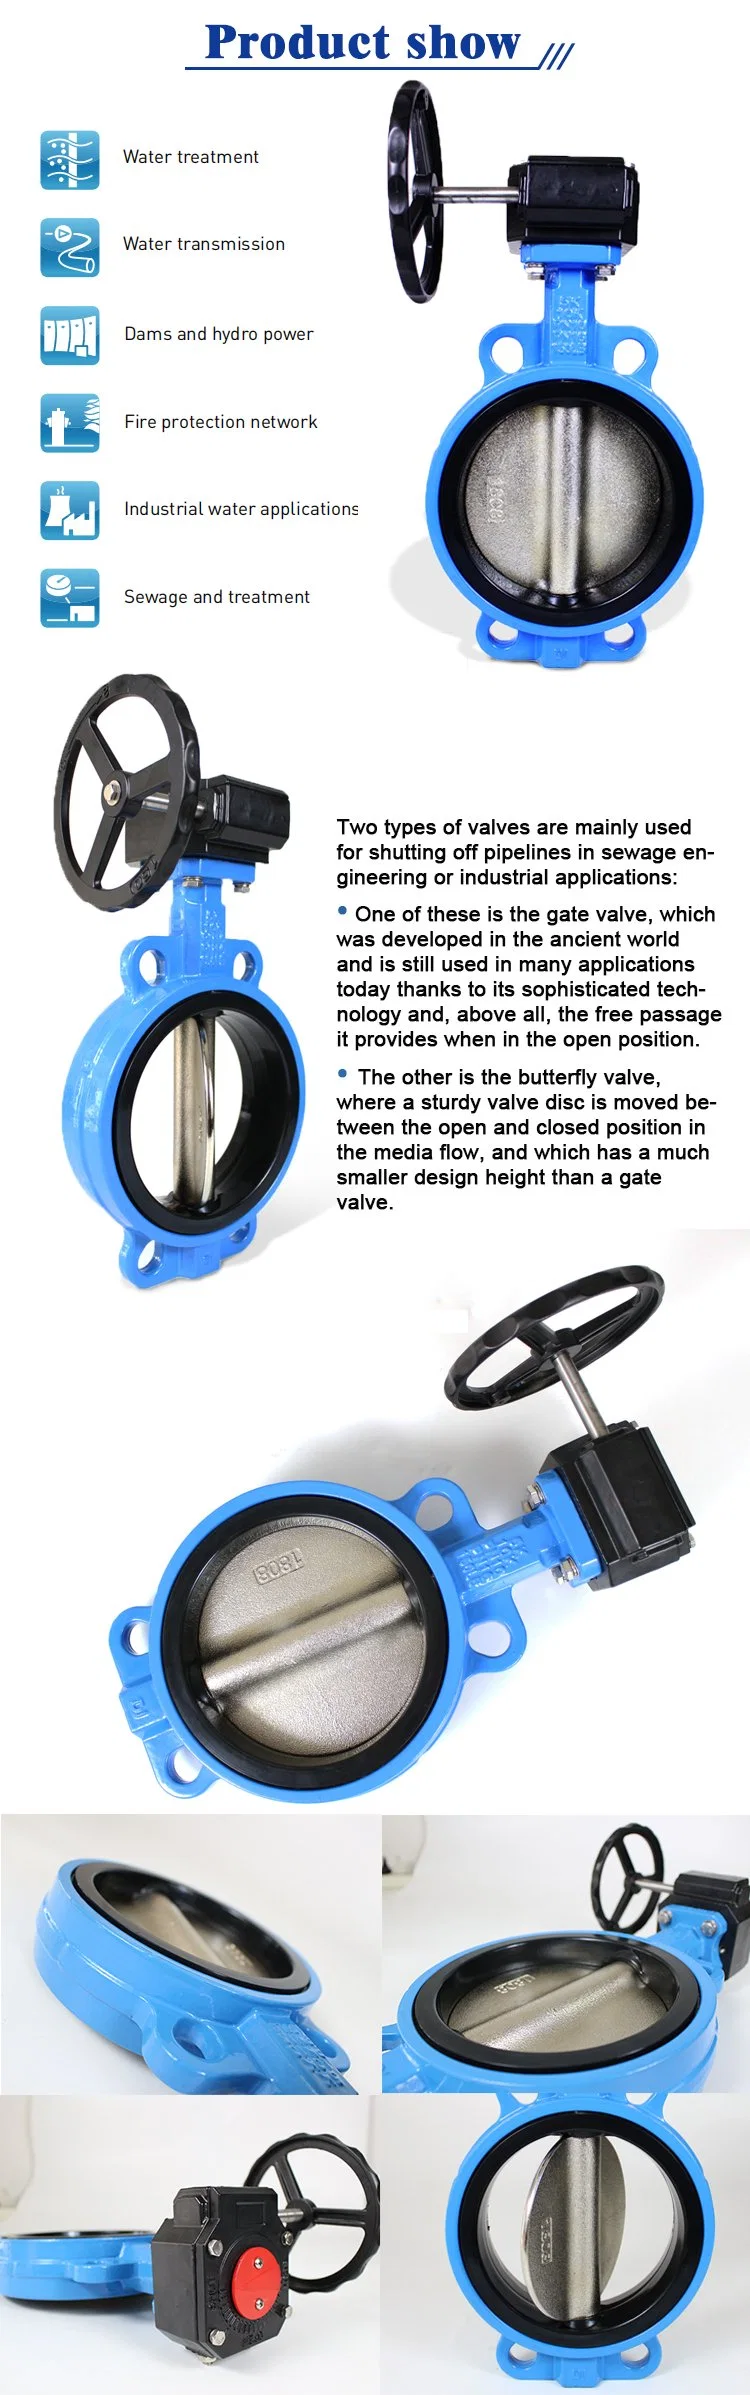 Gearbox Actuated DN40-DN600 Butterfly Valve for Irrigation